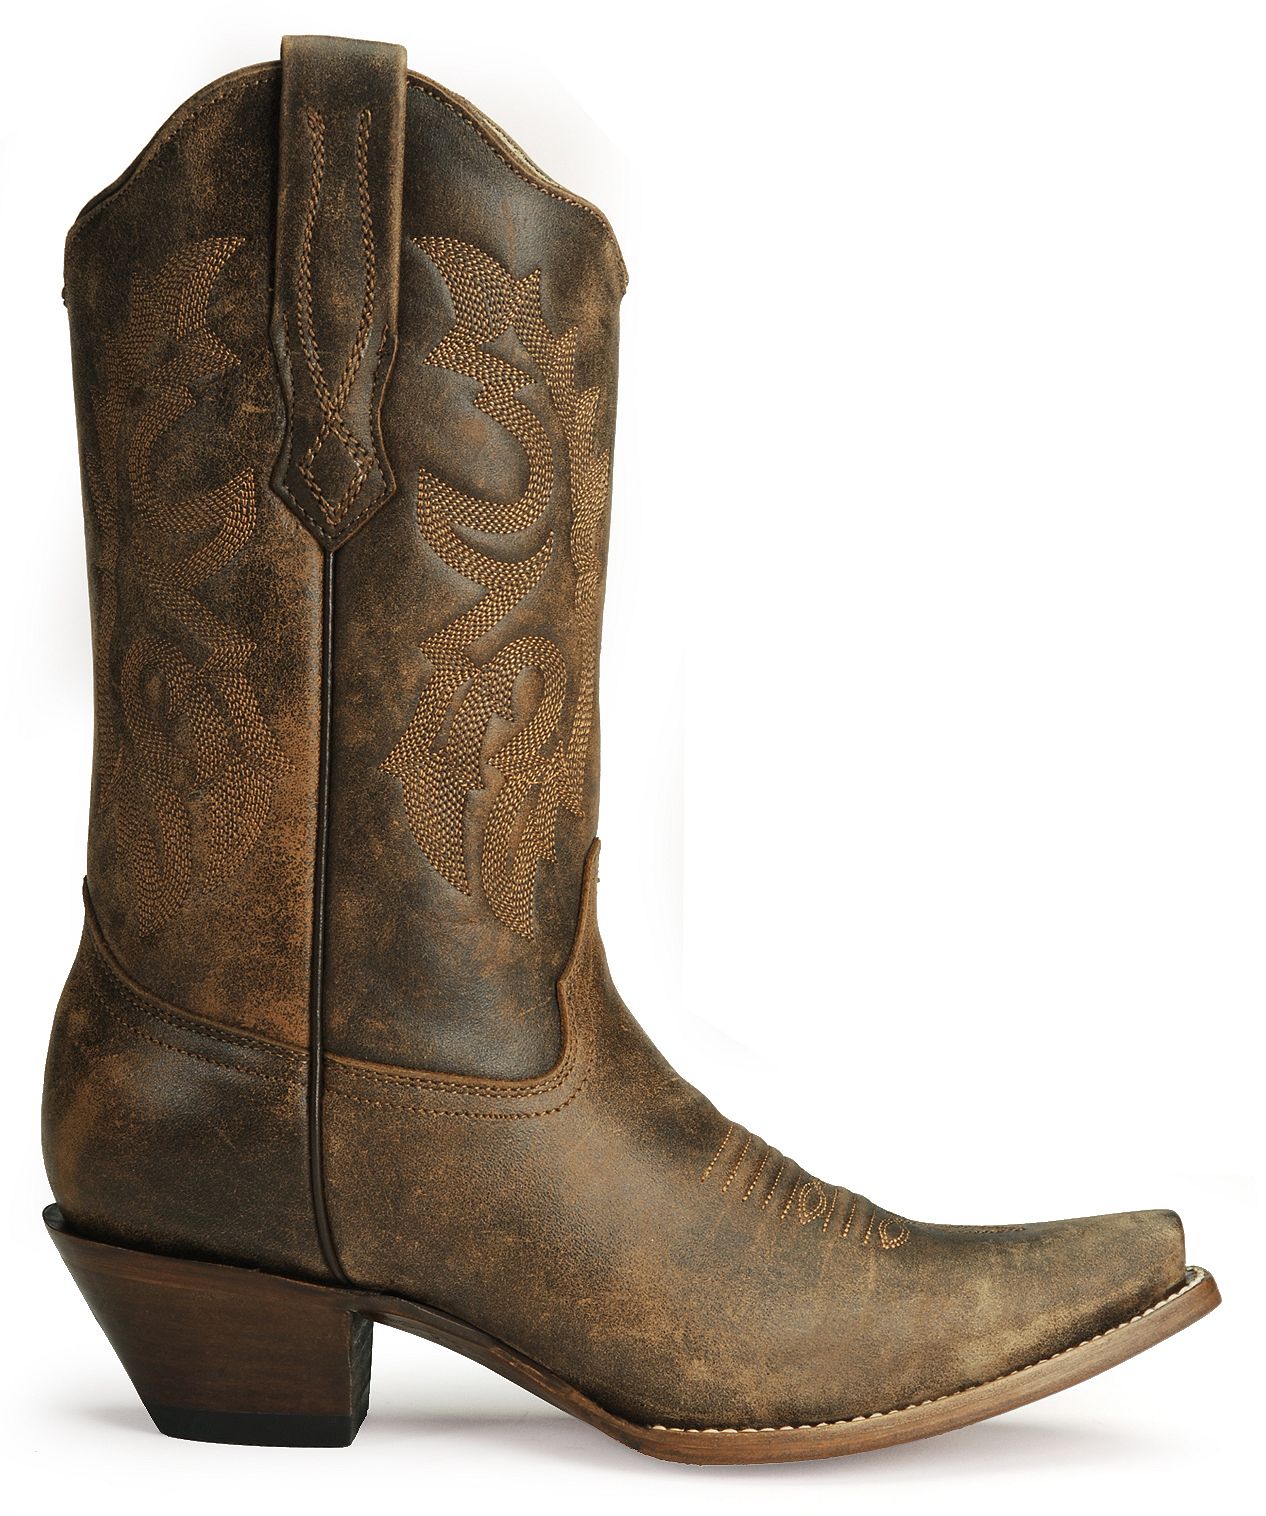 Corral Distressed Leather Western Cowgirl Boots - Snip Toe | Sheplers